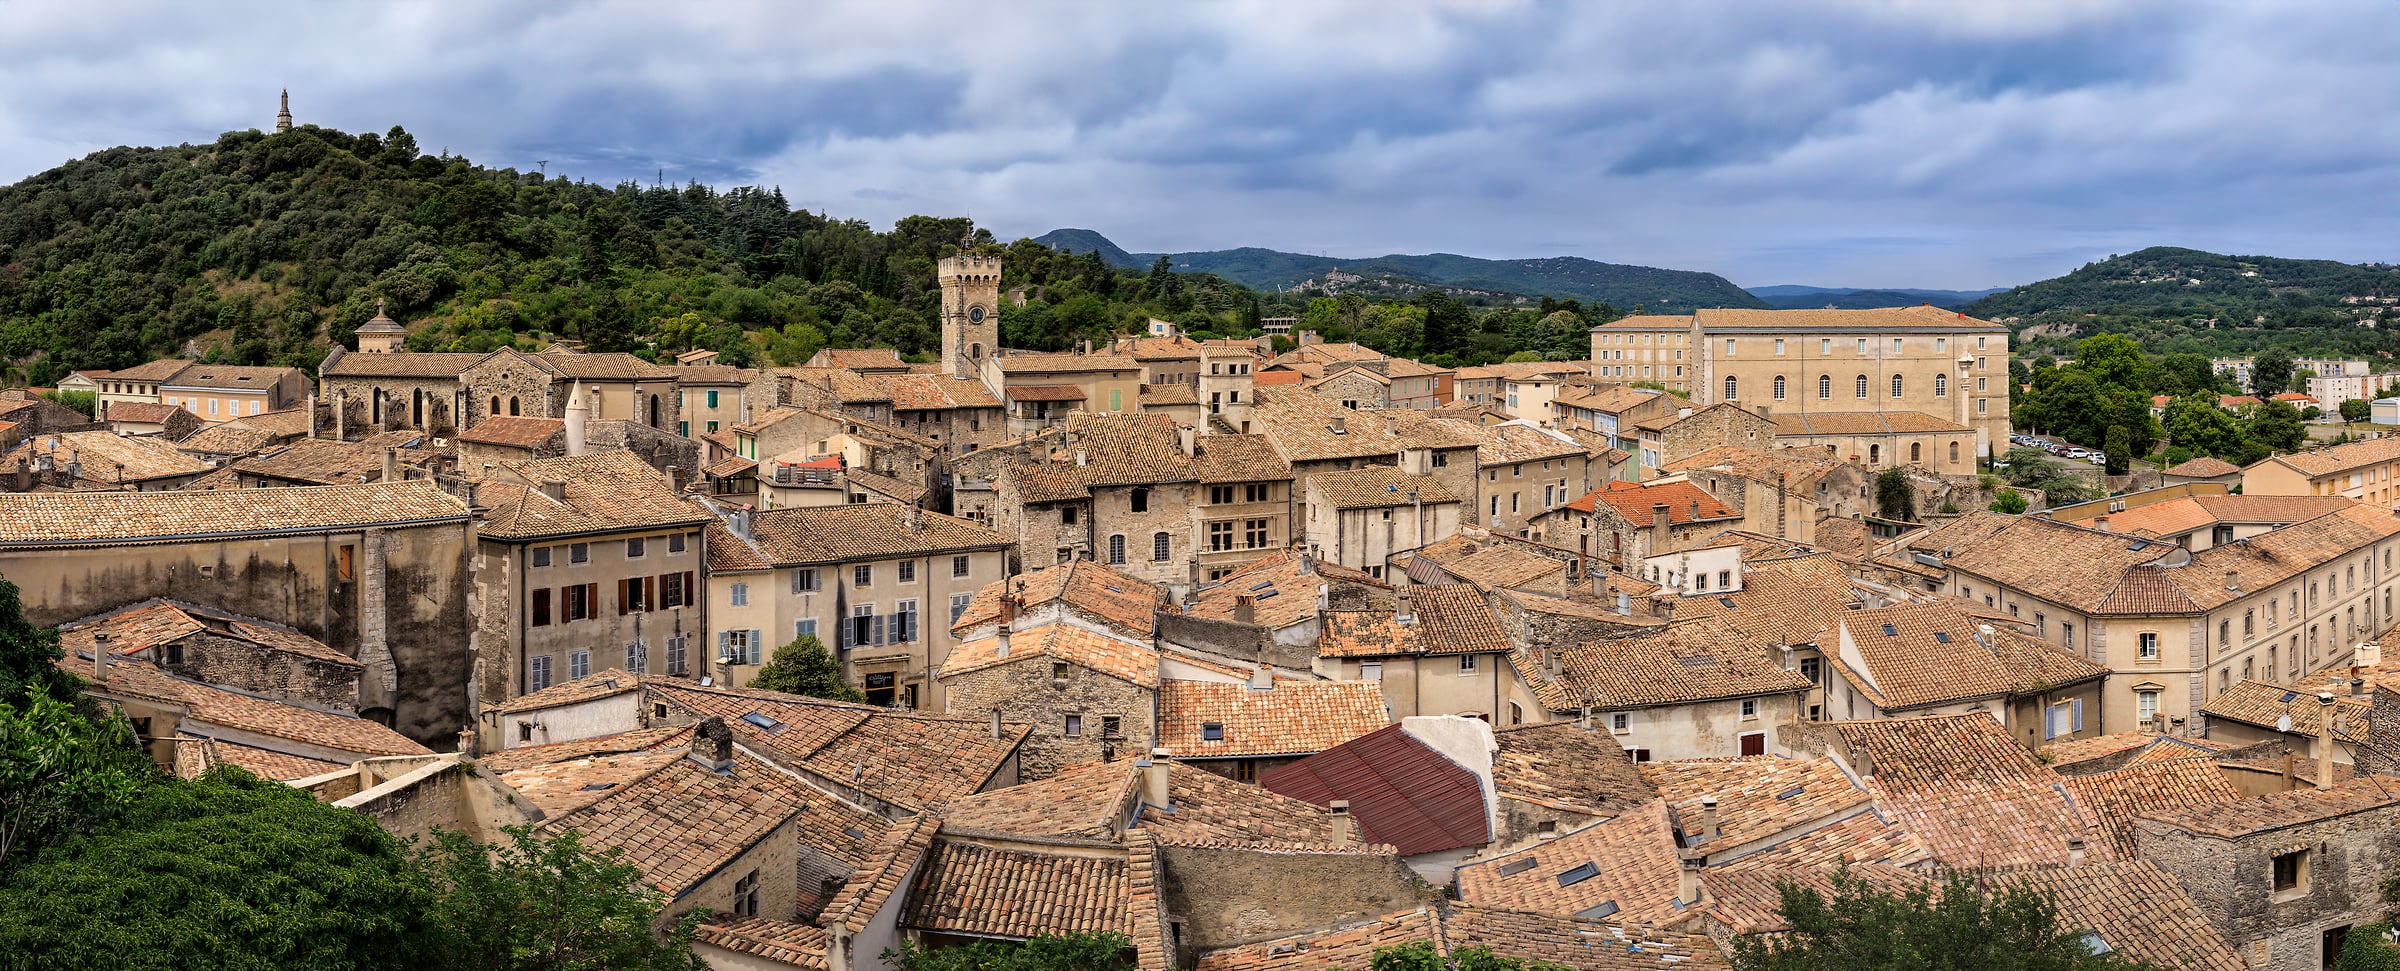 6,266 megapixels! A very high resolution, large-format VAST photo print of a village in France; gigapixel photograph created by Scott Dimond in Tour de Châteauvieux, Viviers, France.